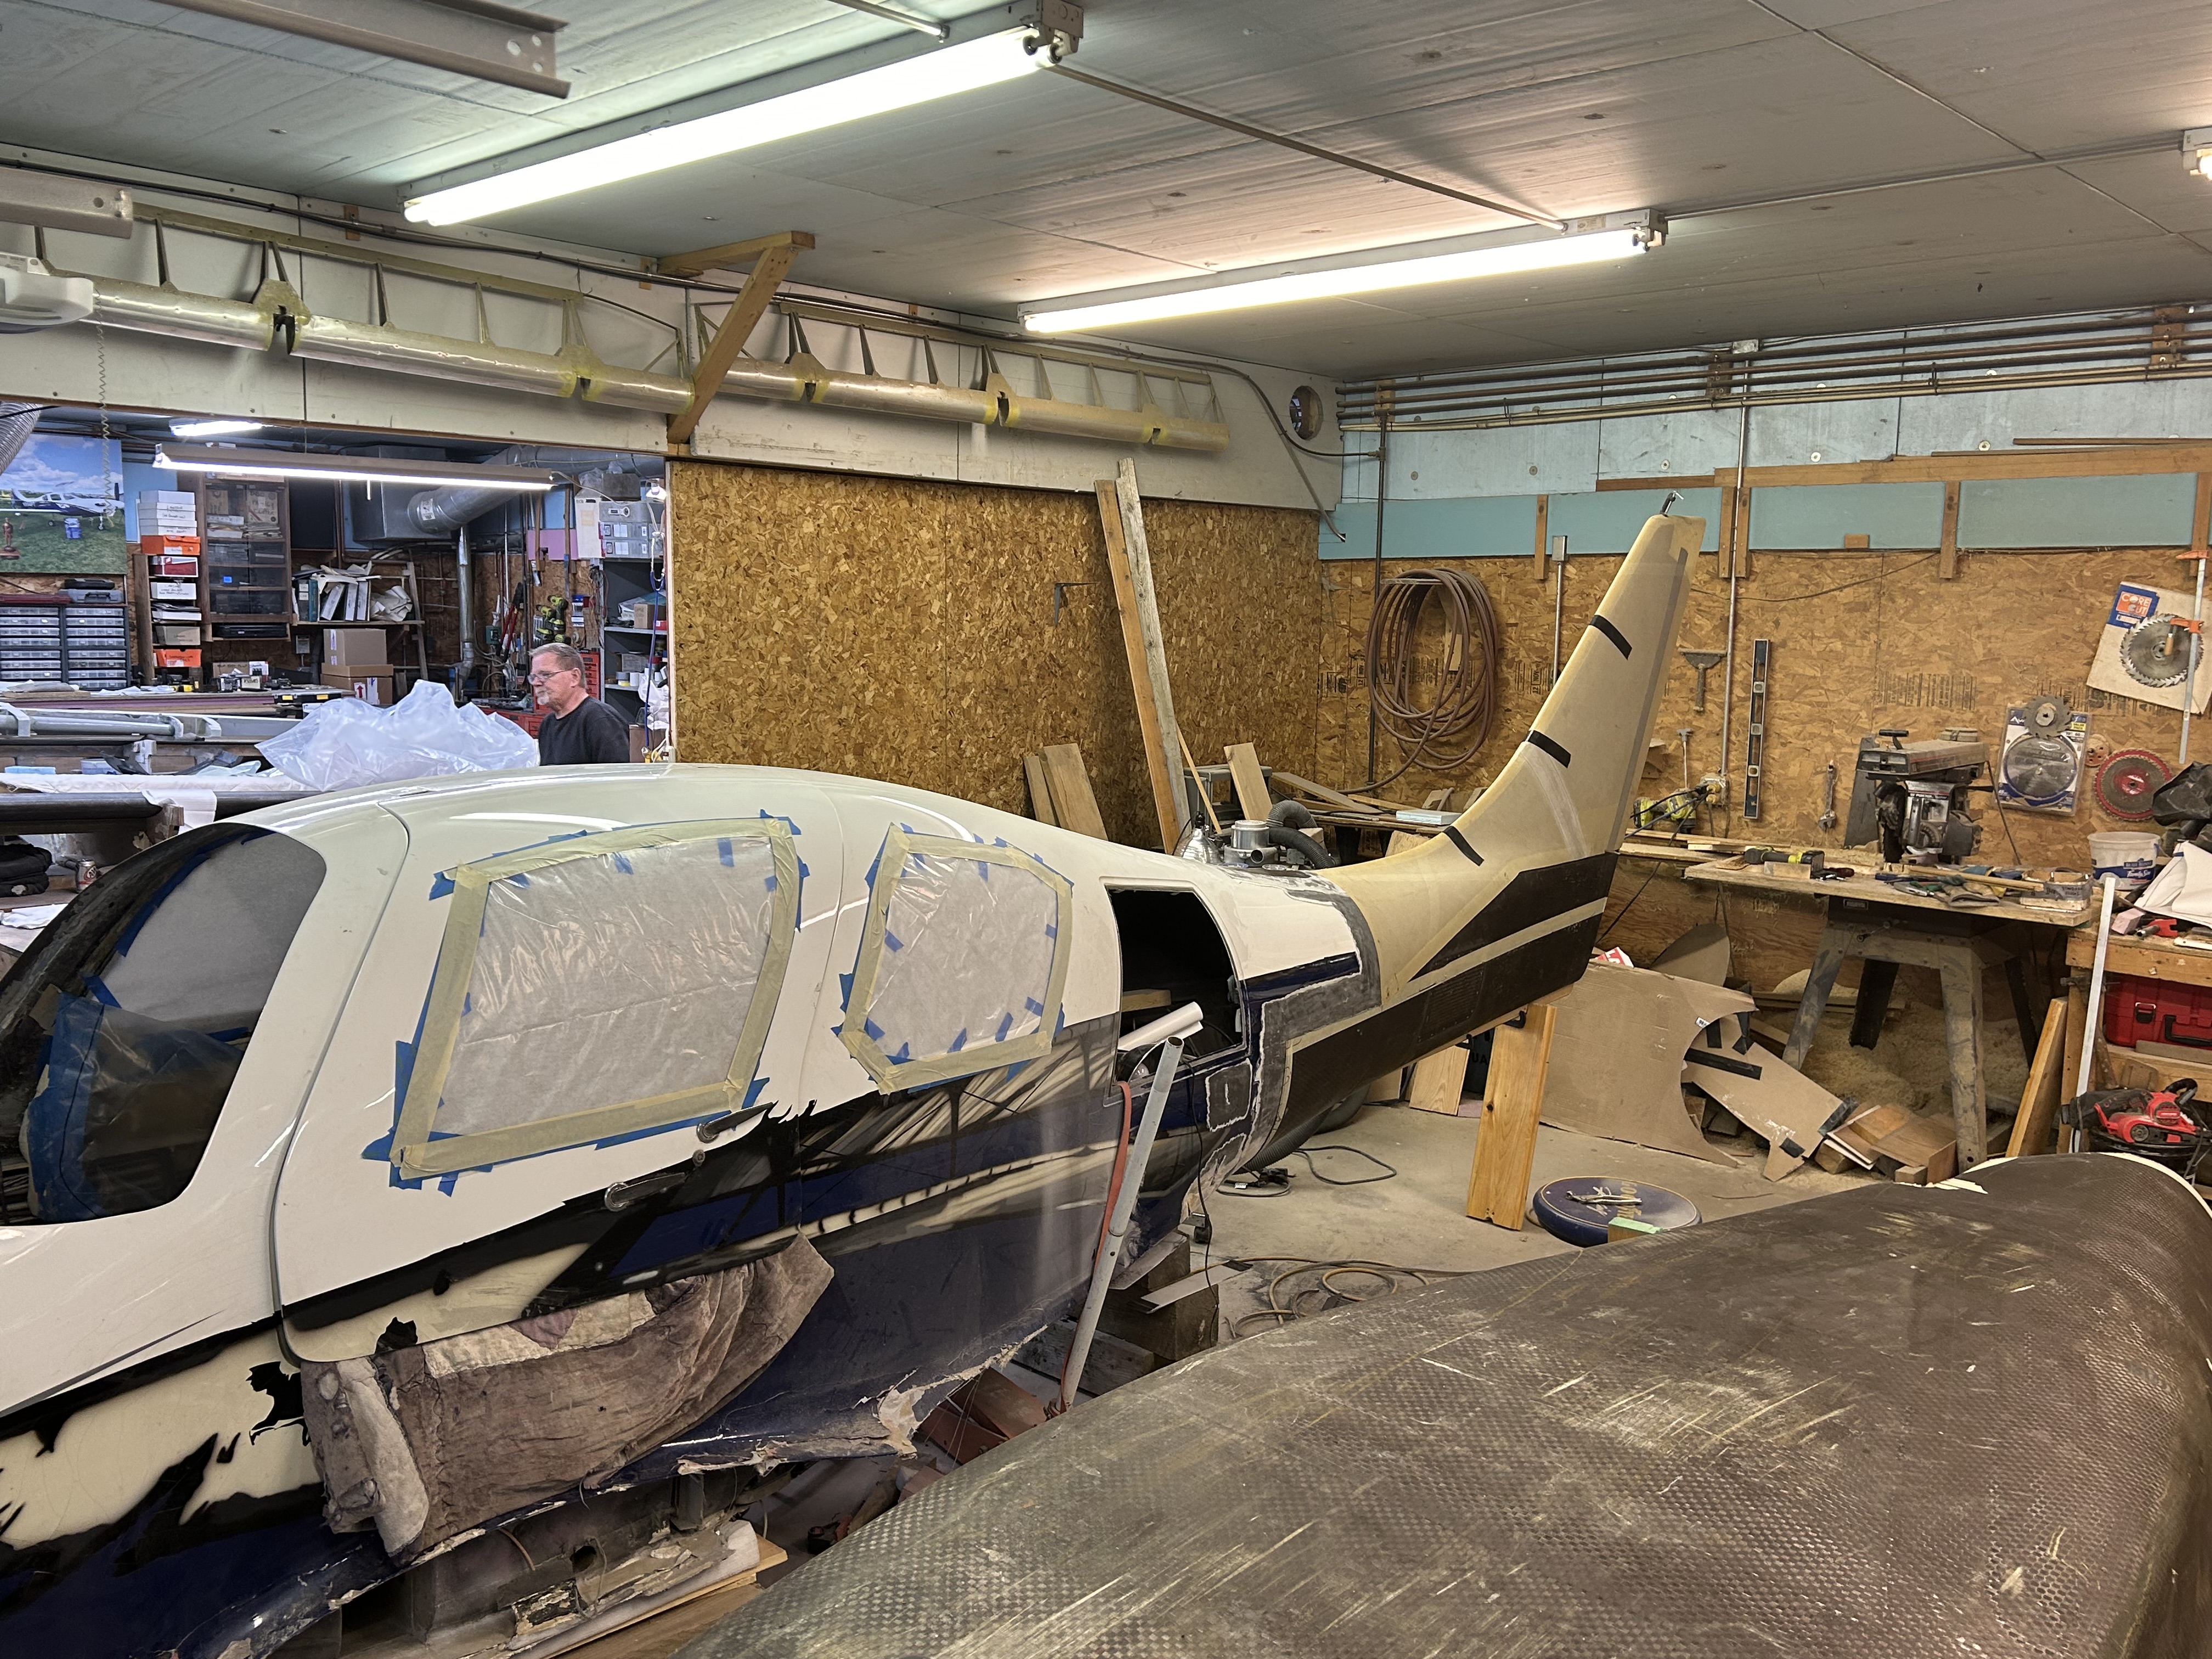 Repair section of lower fuselage fitted to plane with vertical stabilizer